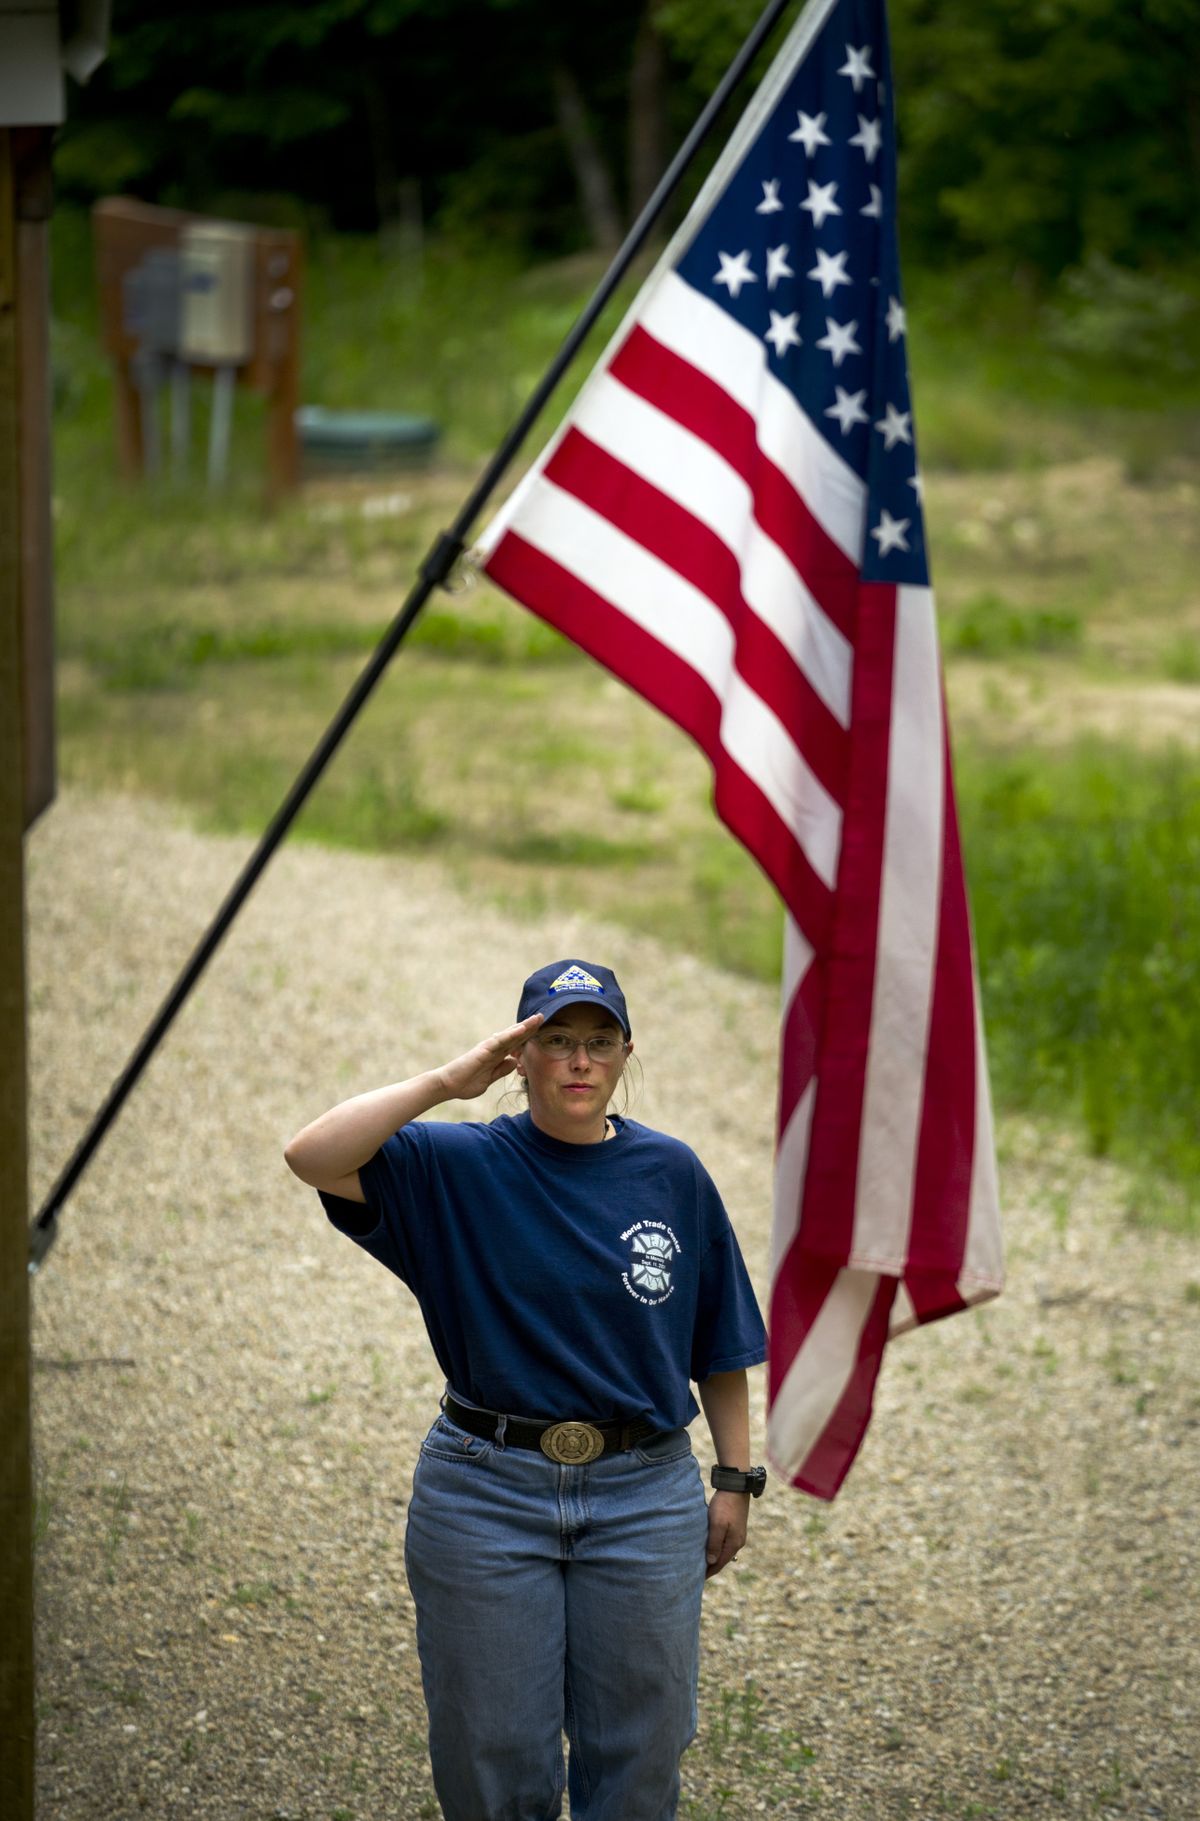 Jennifer Barcklay salutes the flag before retiring it for the evening at her rural Spokane County home on June 8. (Colin Mulvany)